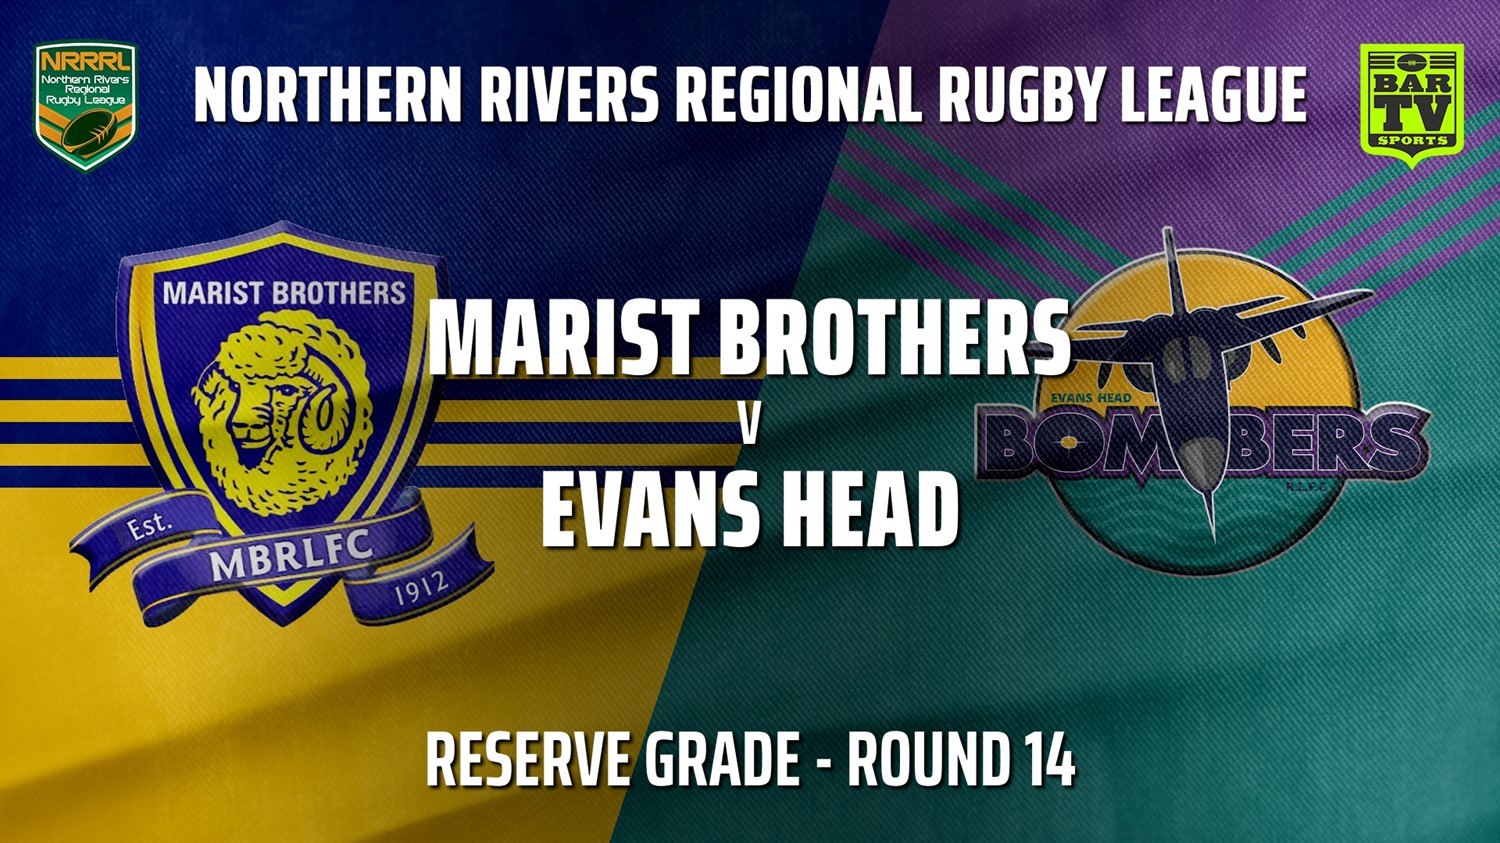 210808-Northern Rivers Round 14 - Reserve Grade - Lismore Marist Brothers Rams v Evans Head Bombers Slate Image